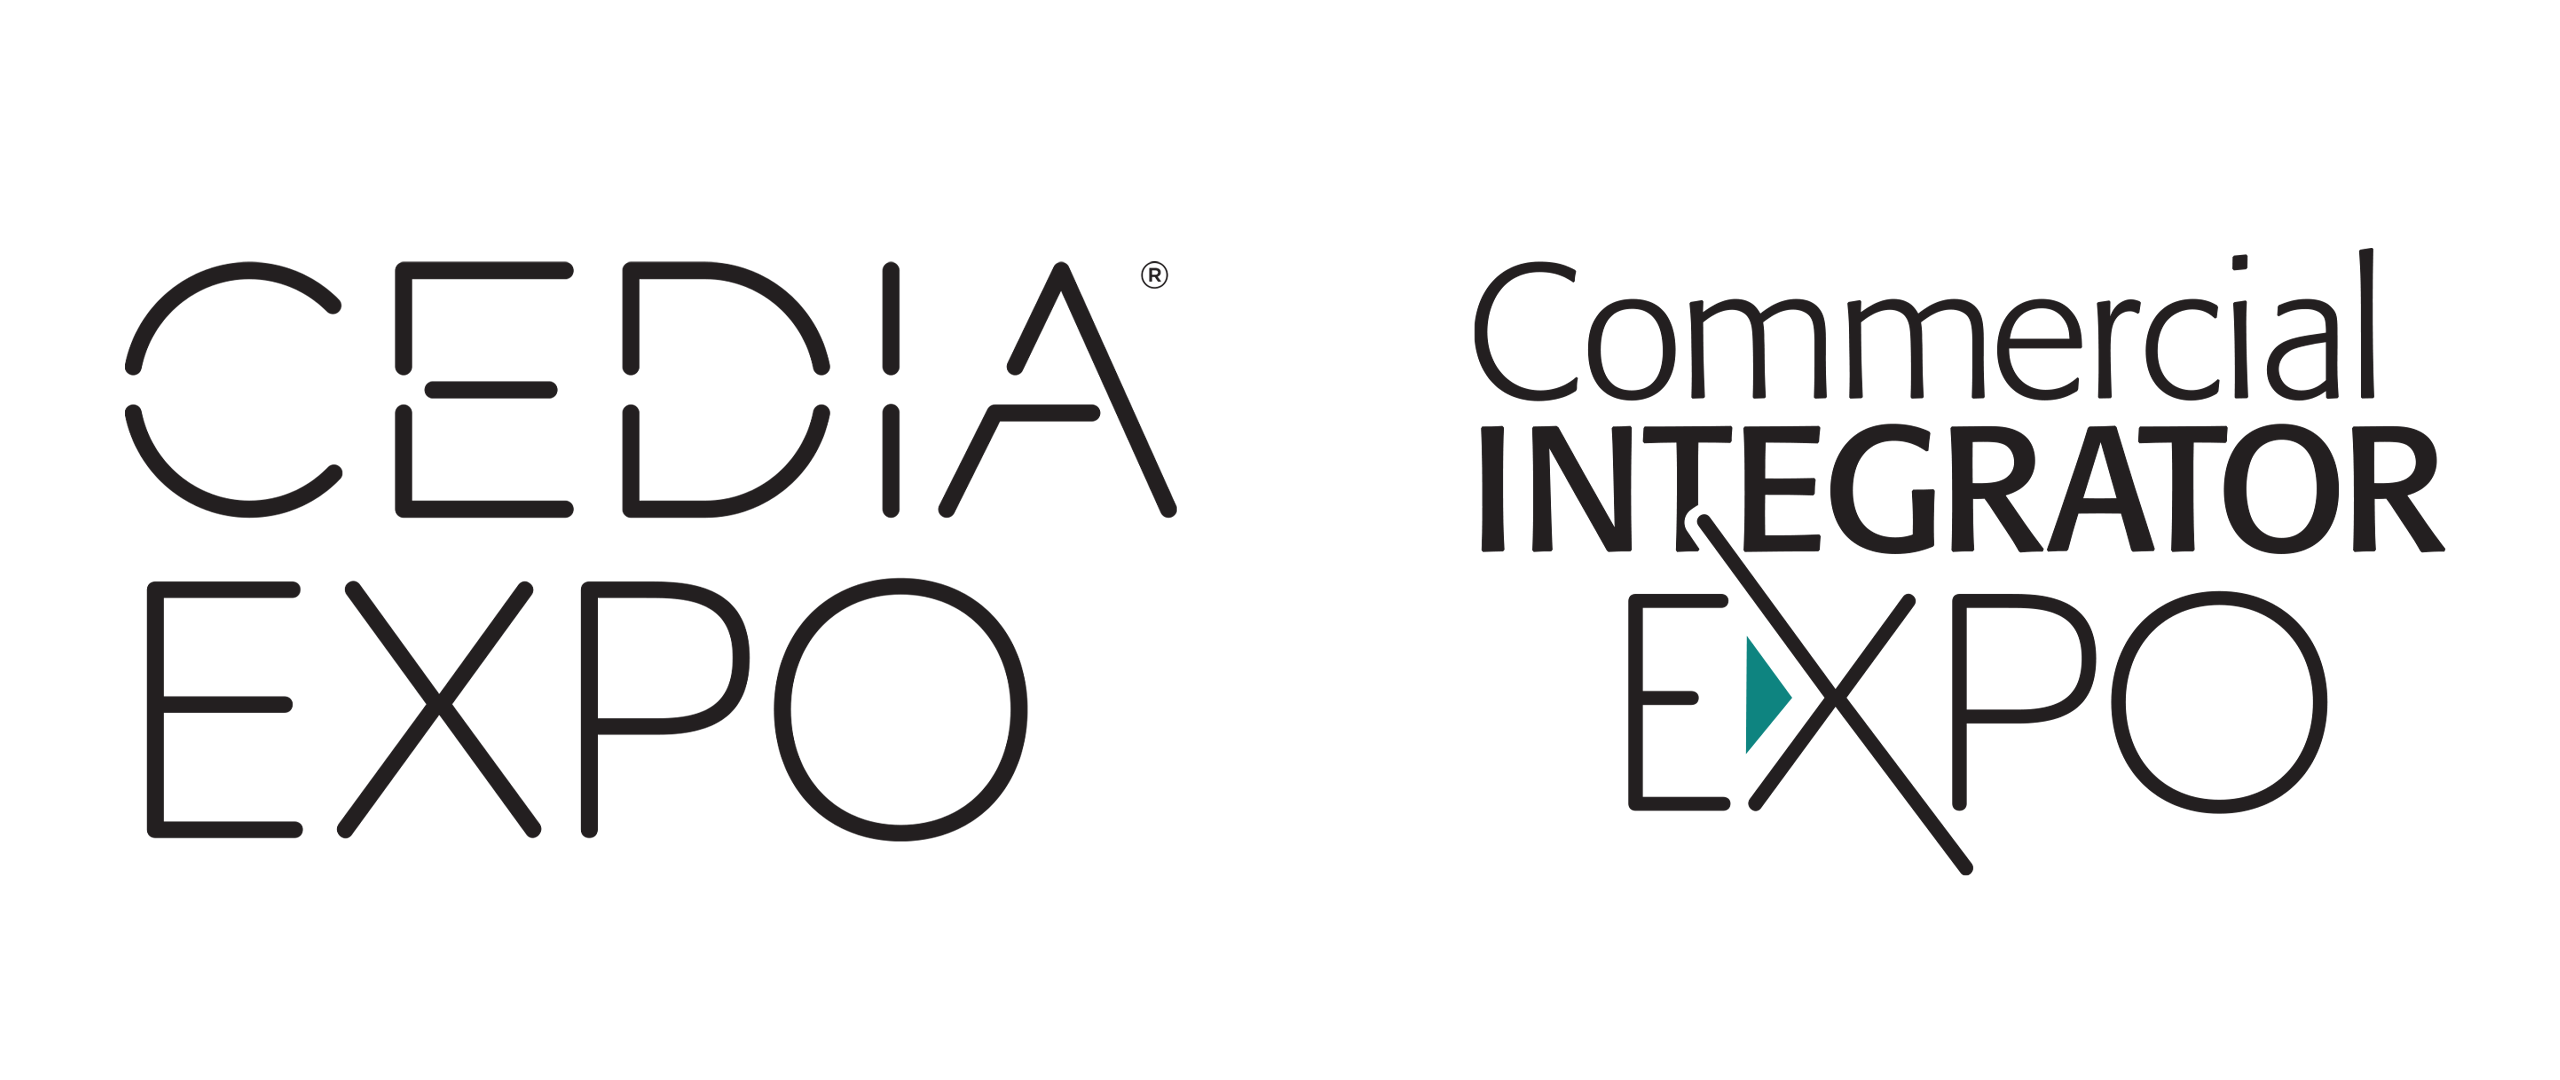 Welcome to CEDIA Expo and Commercial Integrator Expo 2023 Exhibitor Console and Directory